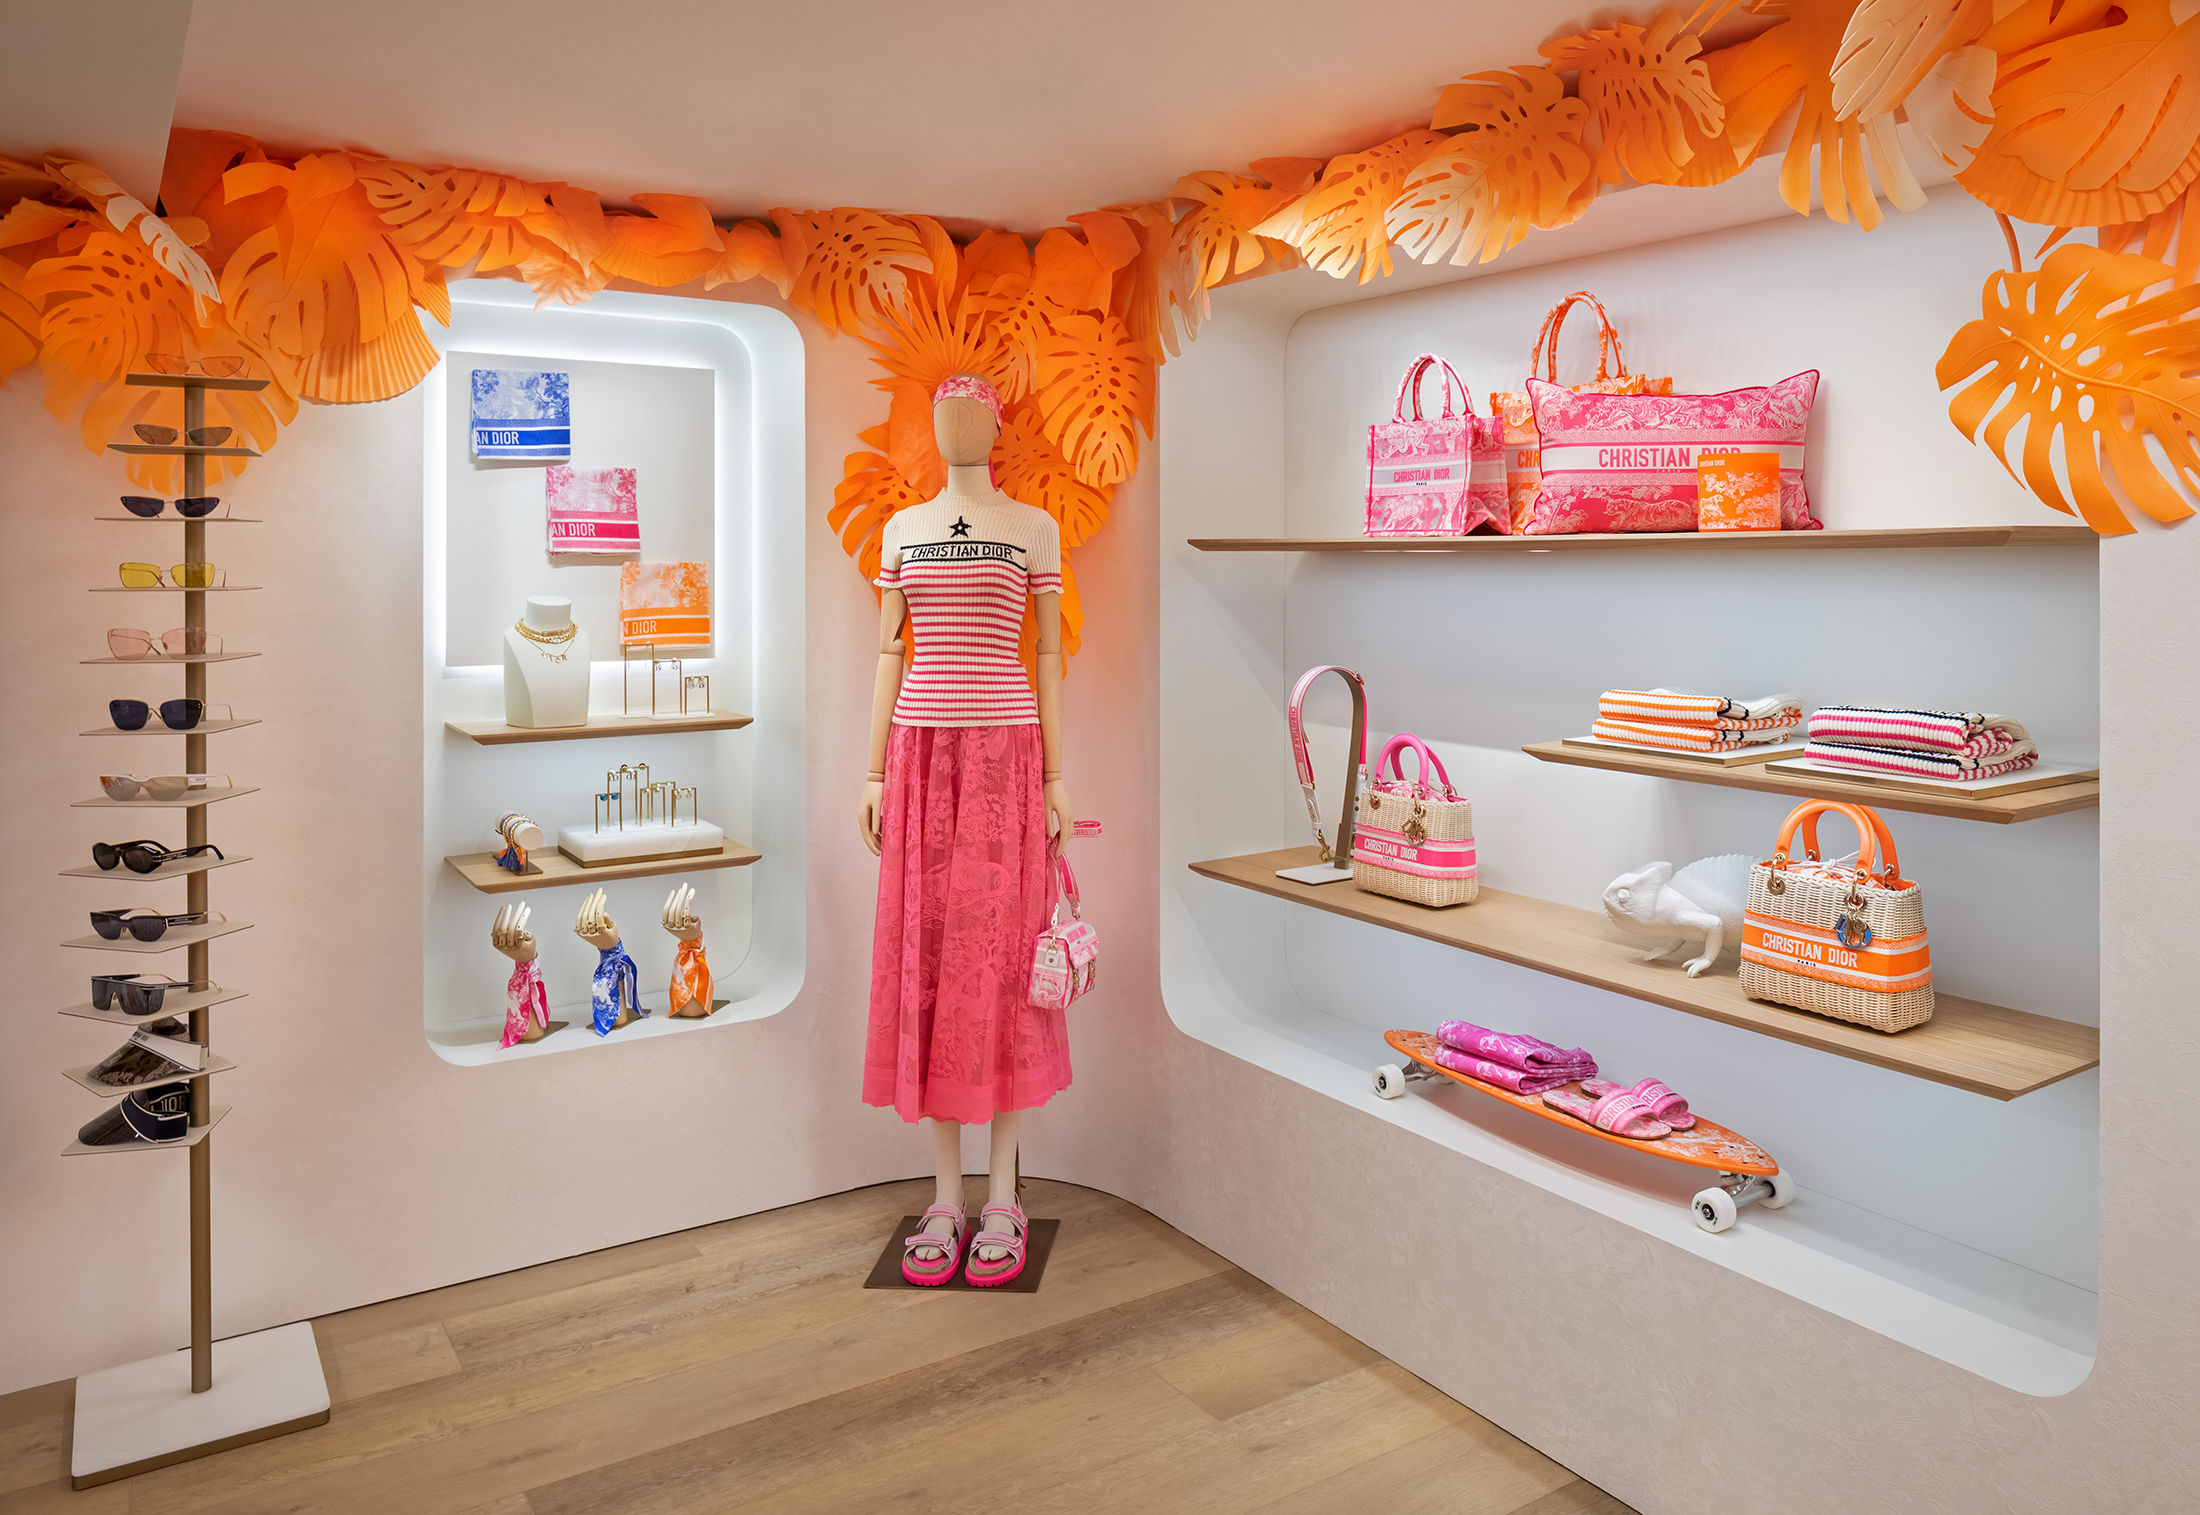 Dior Launches Dioriviera Pop-Up Experience at Luxury Hotel in